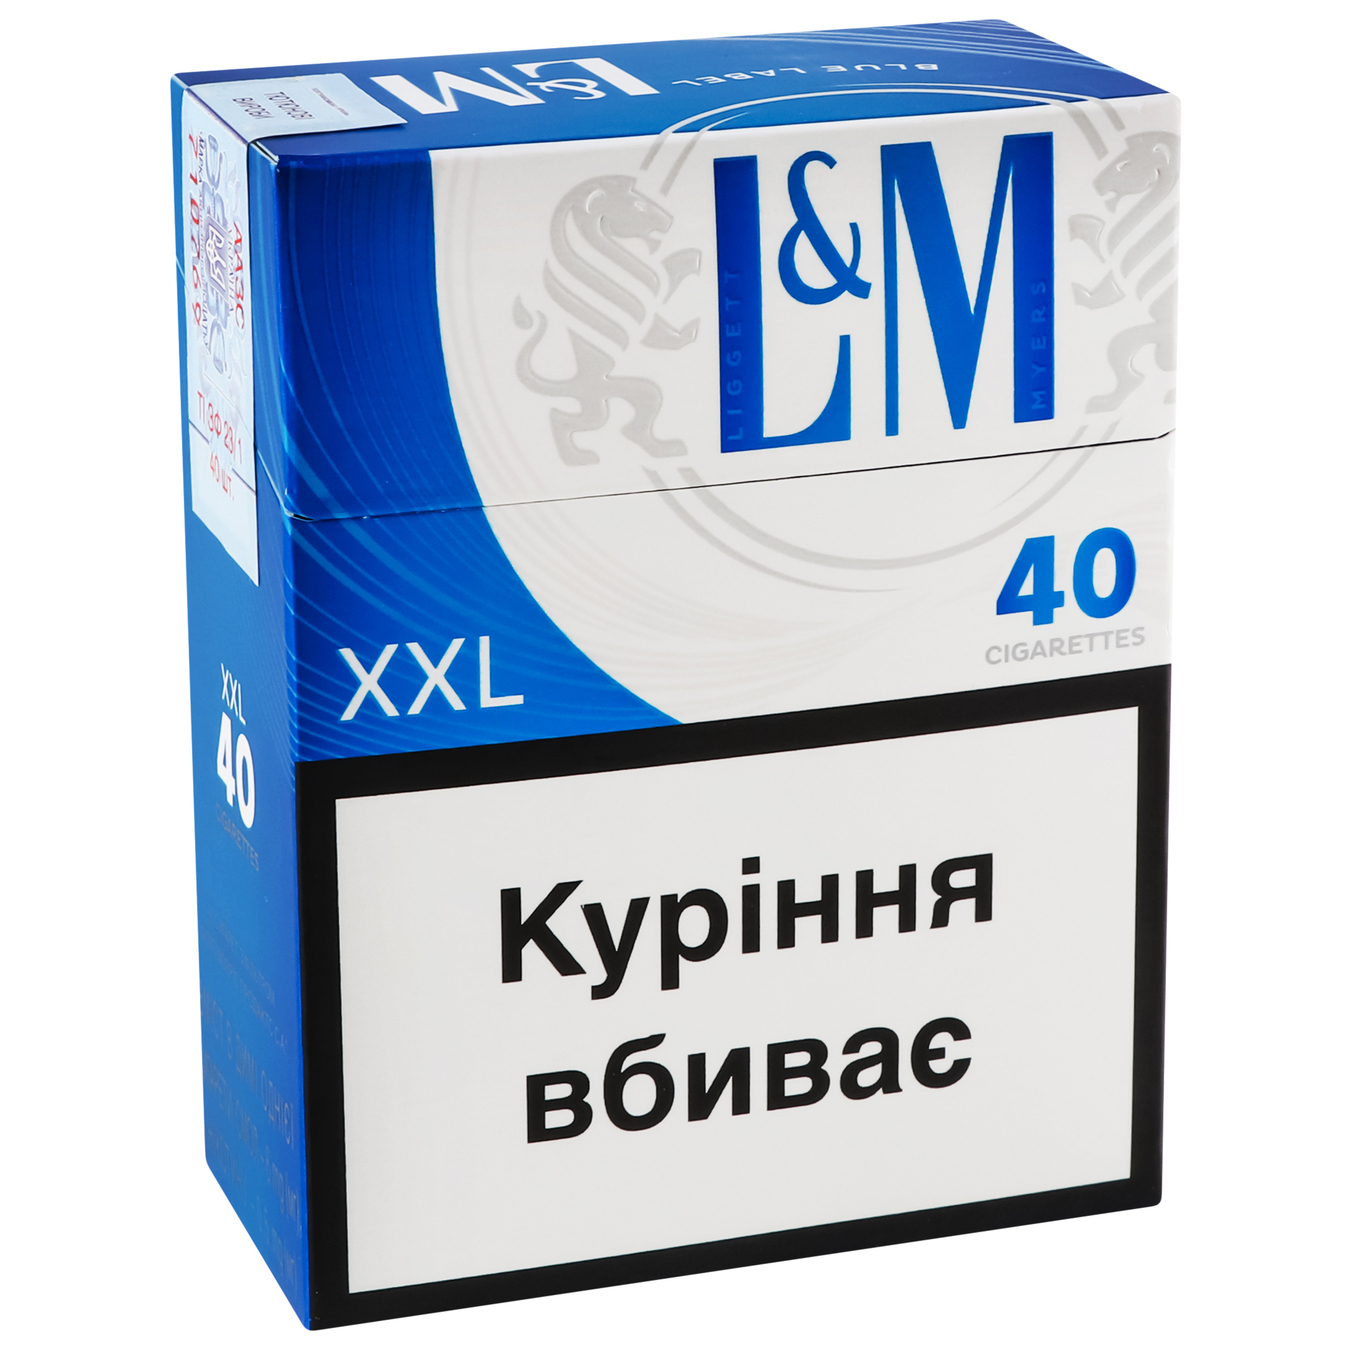 Cigarettes L&M Blue Label 40pcs (the price is indicated without excise tax) 2